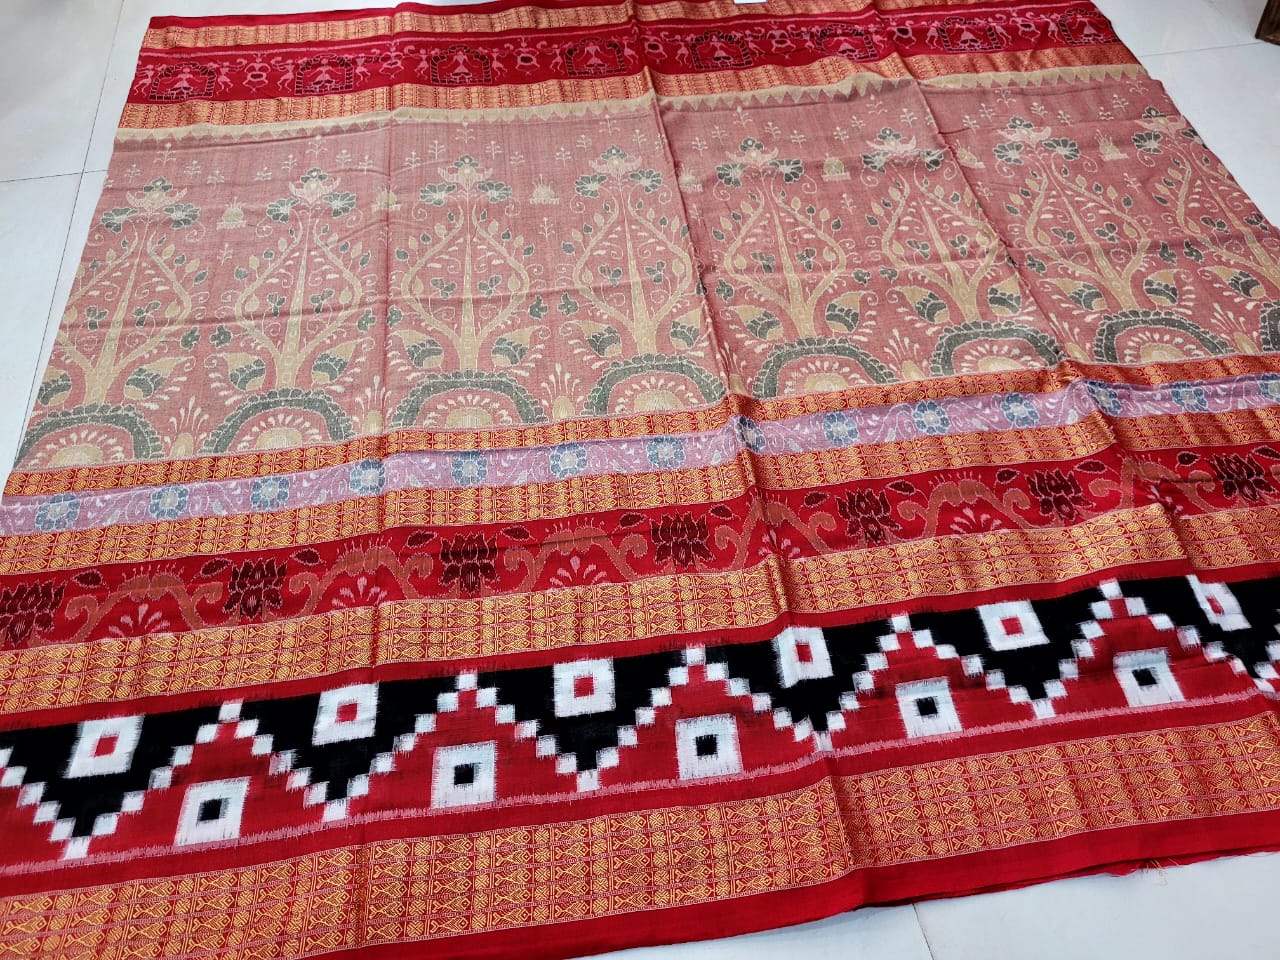 "Handwoven Lovable pink Red and Black Sambalpuri Half tissue silk saree with bandha pallu, complemented by a matching blouse piece. Elegant and traditional.